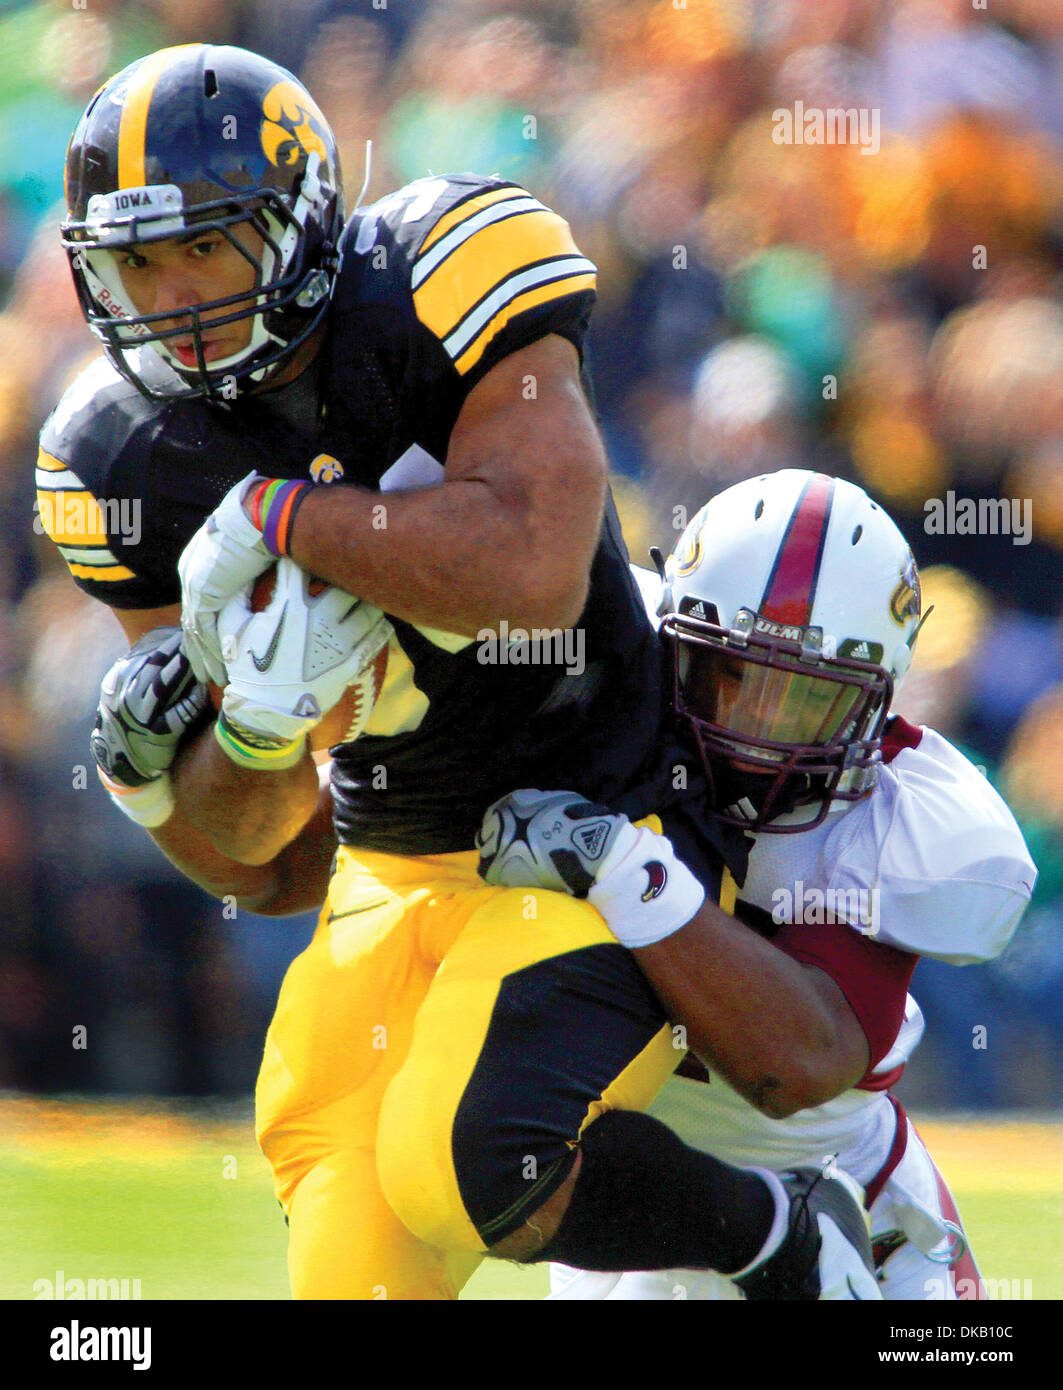 Sept. 24, 2011 - Iowa City, Iowa, U.S. - Iowa's Marcus Coker gets dragged down by University of Louisiana Monroe's Darius Prelow after picking up yards on a second attempt, Saturday, September 24, 2011, during first half action at Kinnick Stadium in Iowa City. (Credit Image: © John Schultz/Quad-City Times/ZUMAPRESS.com) Stock Photo